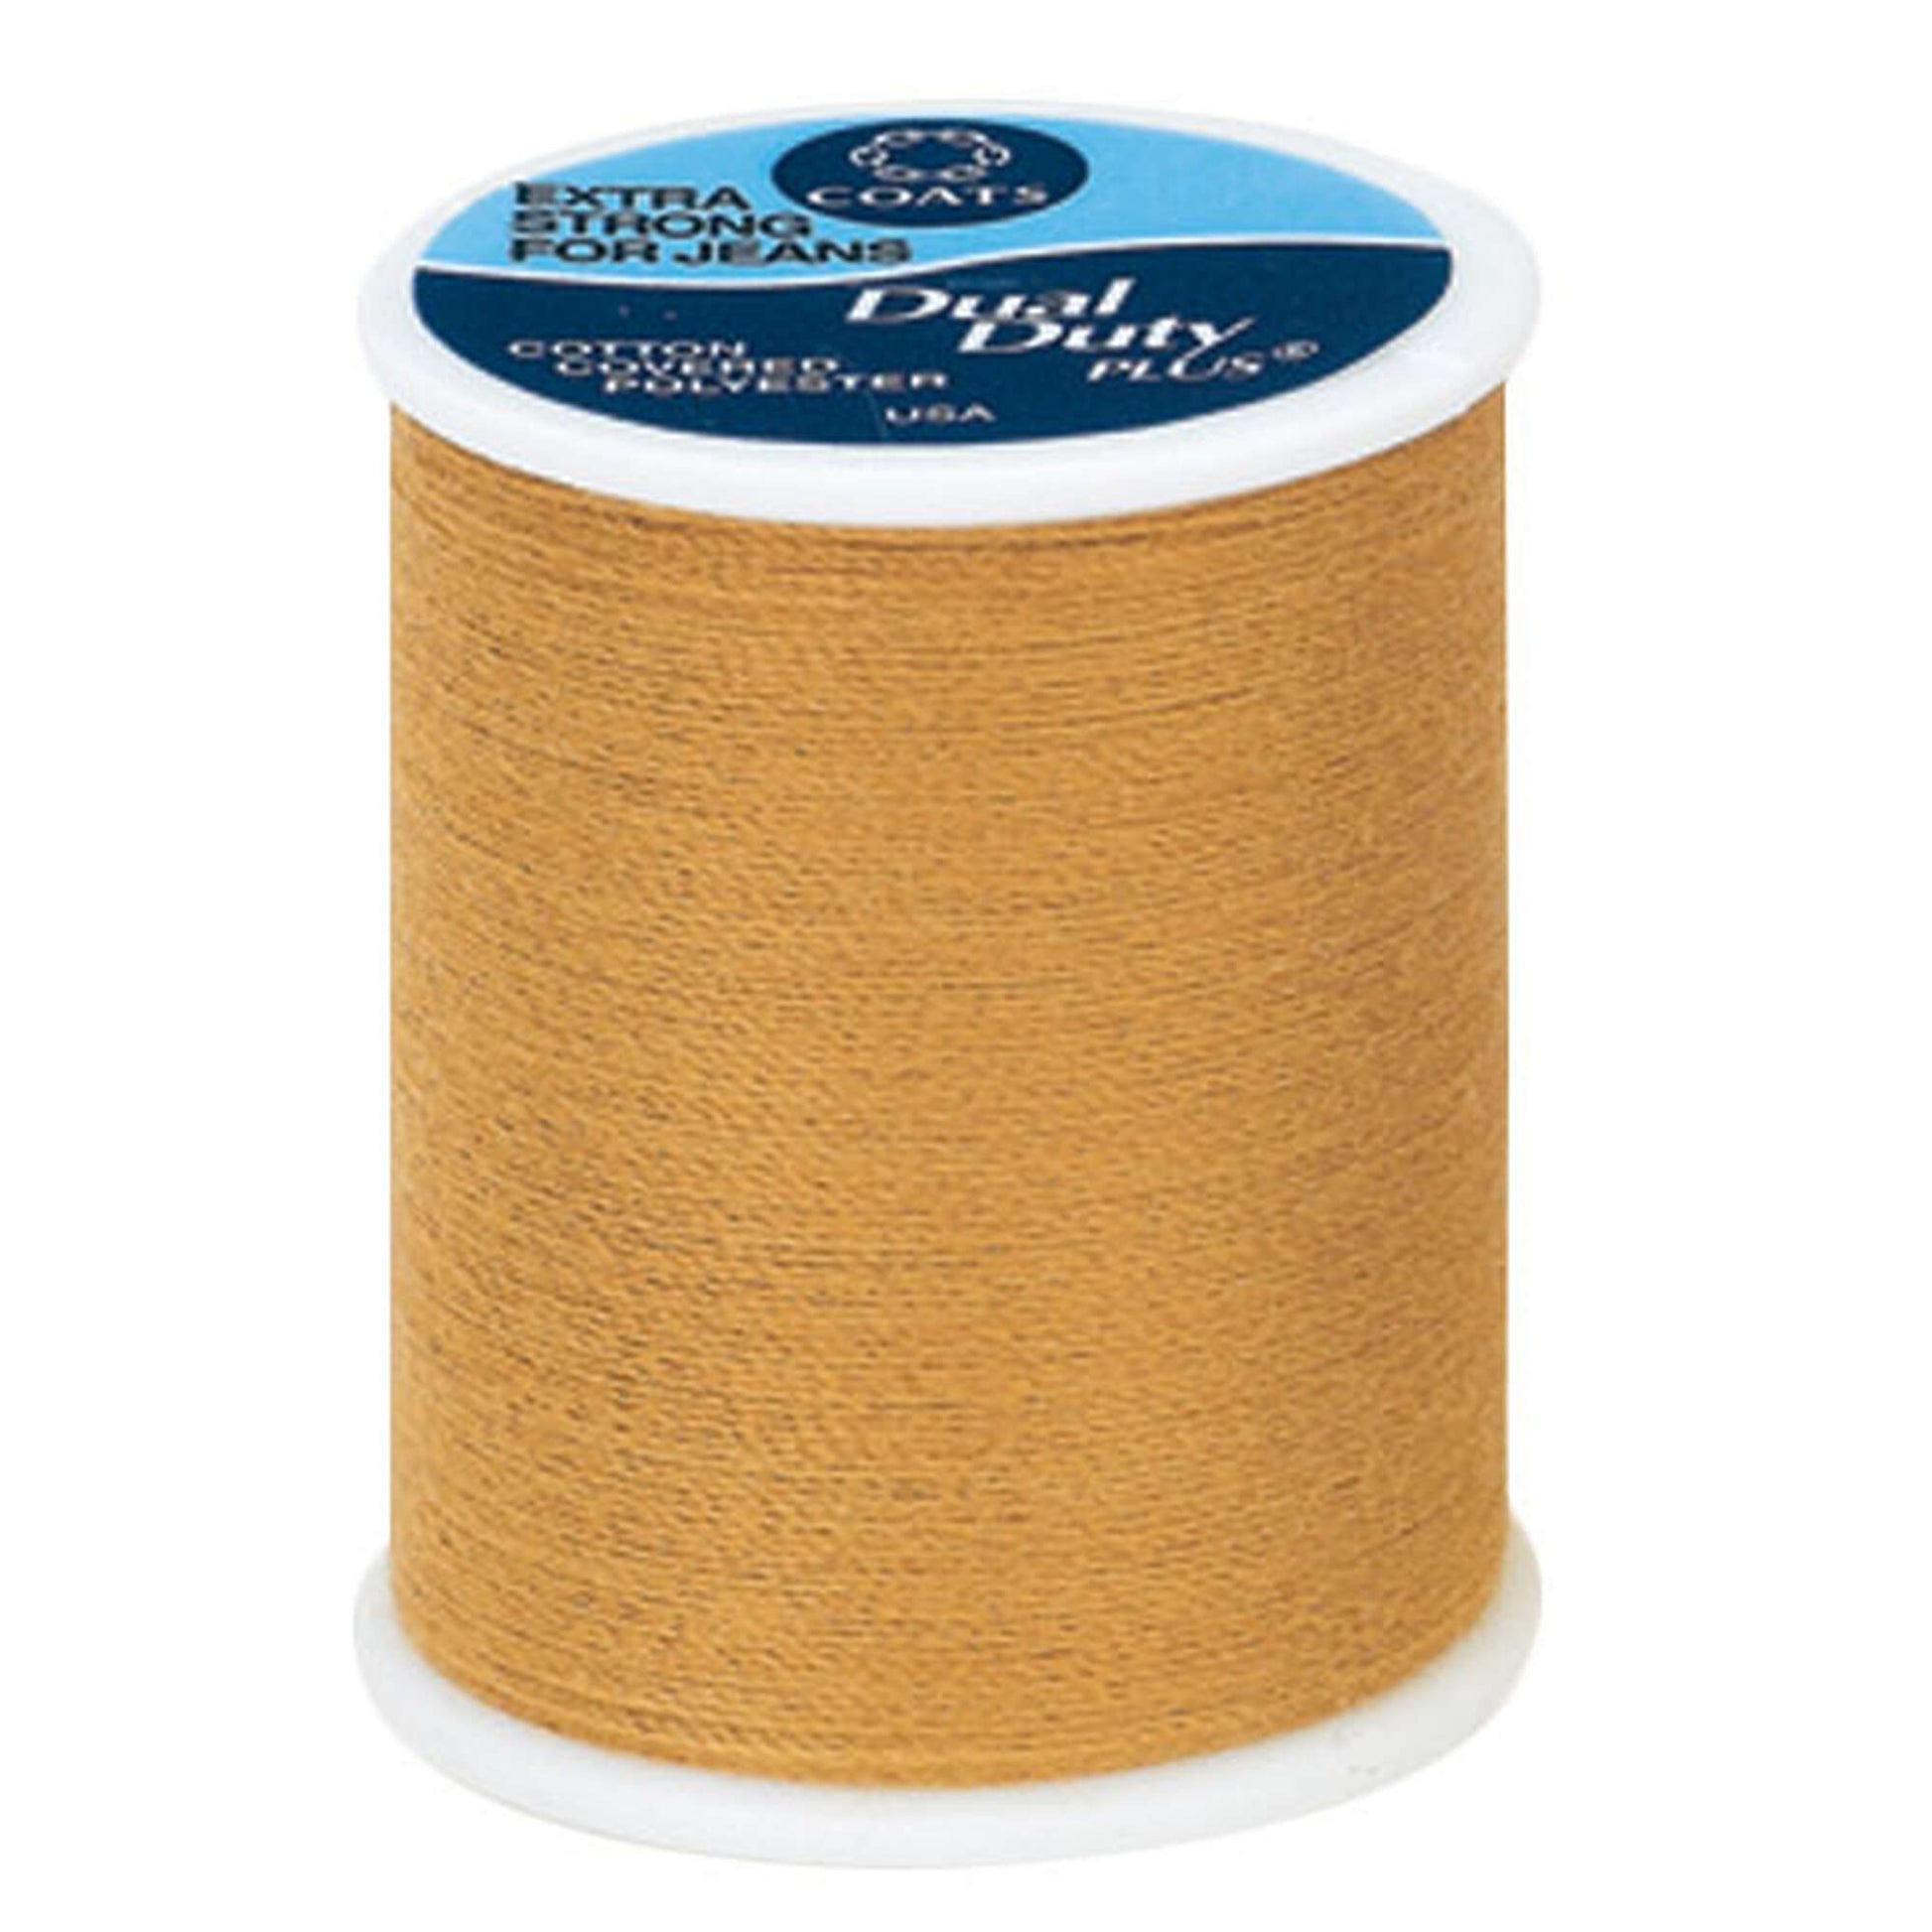 Dual Duty Plus Extra Strong Thread for Jeans (70 Yards)